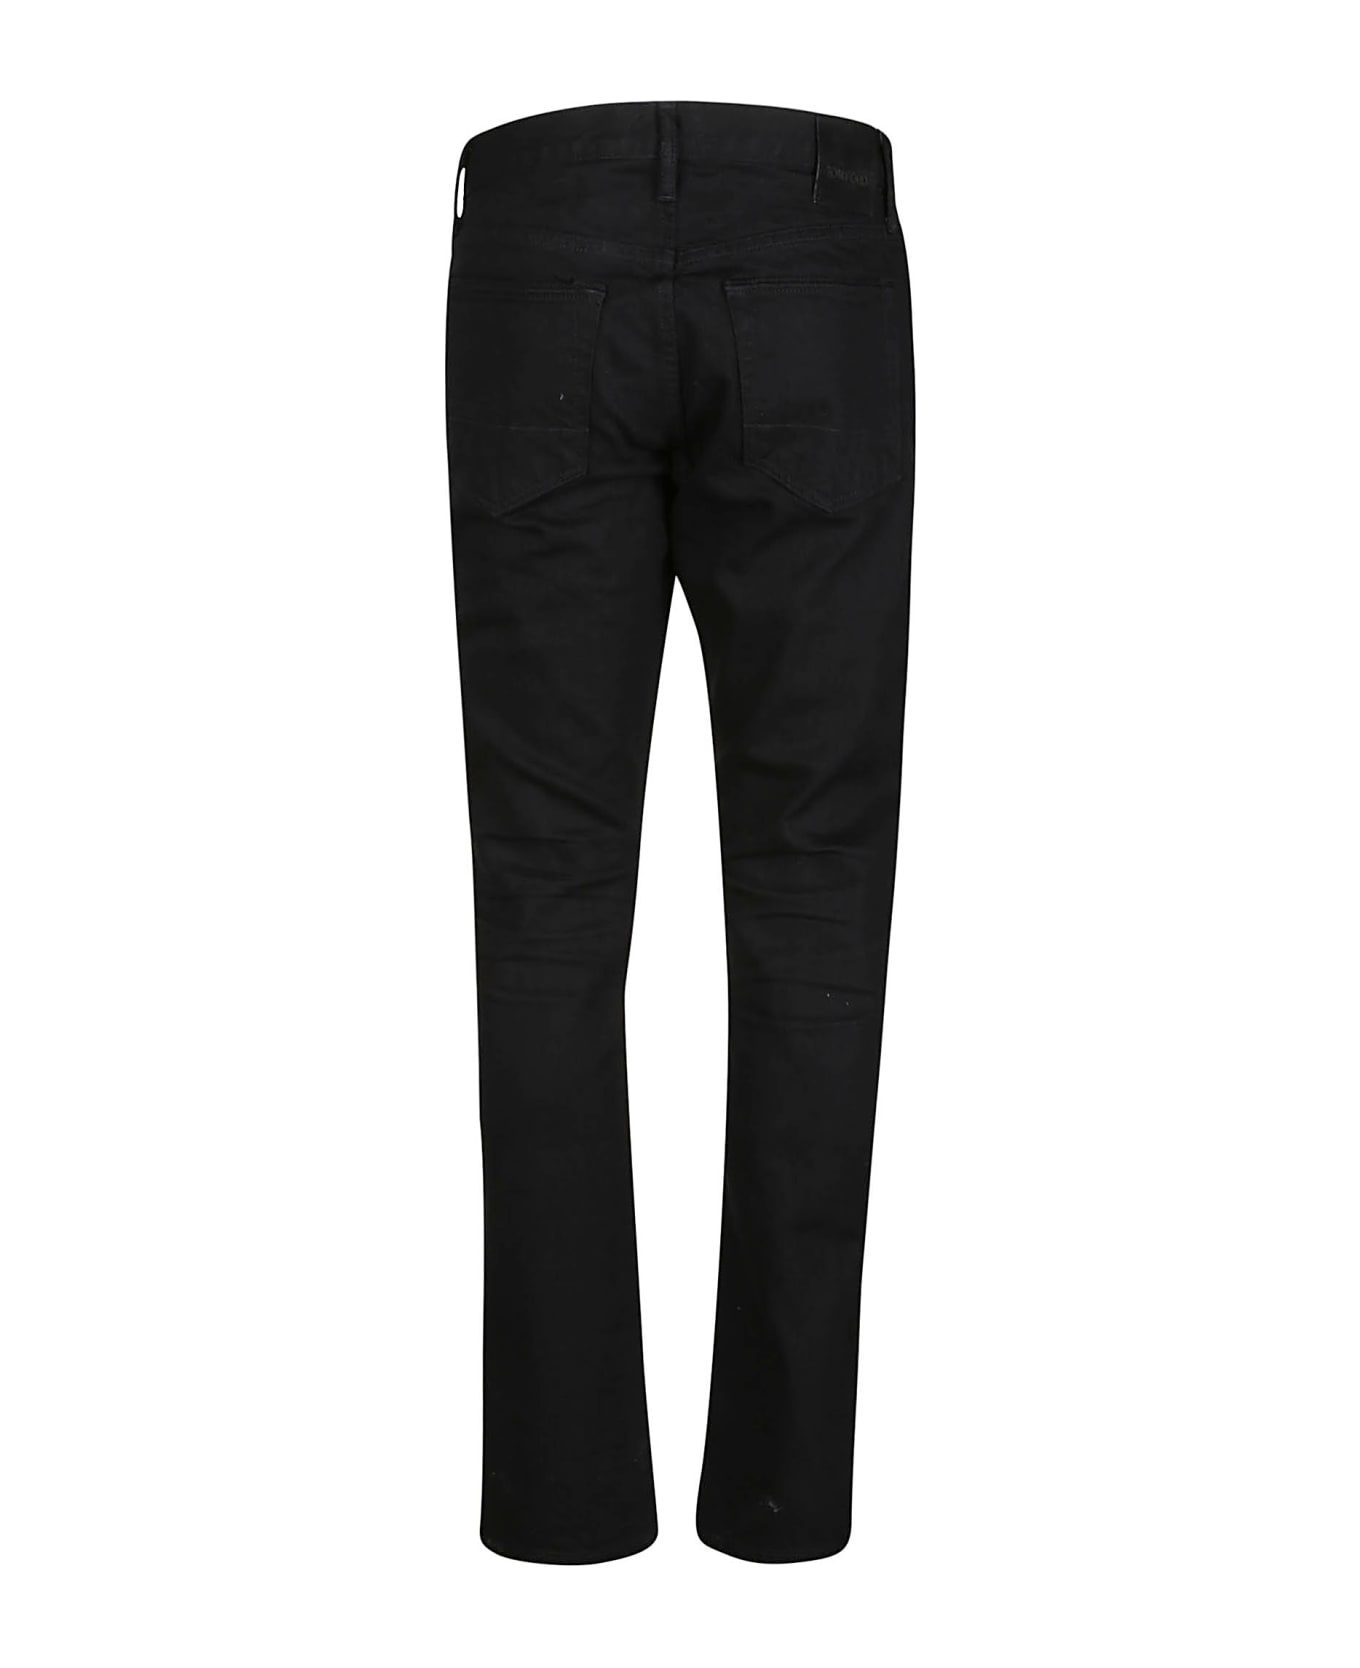 Tom Ford Slim Fit Jeans - Lead ボトムス